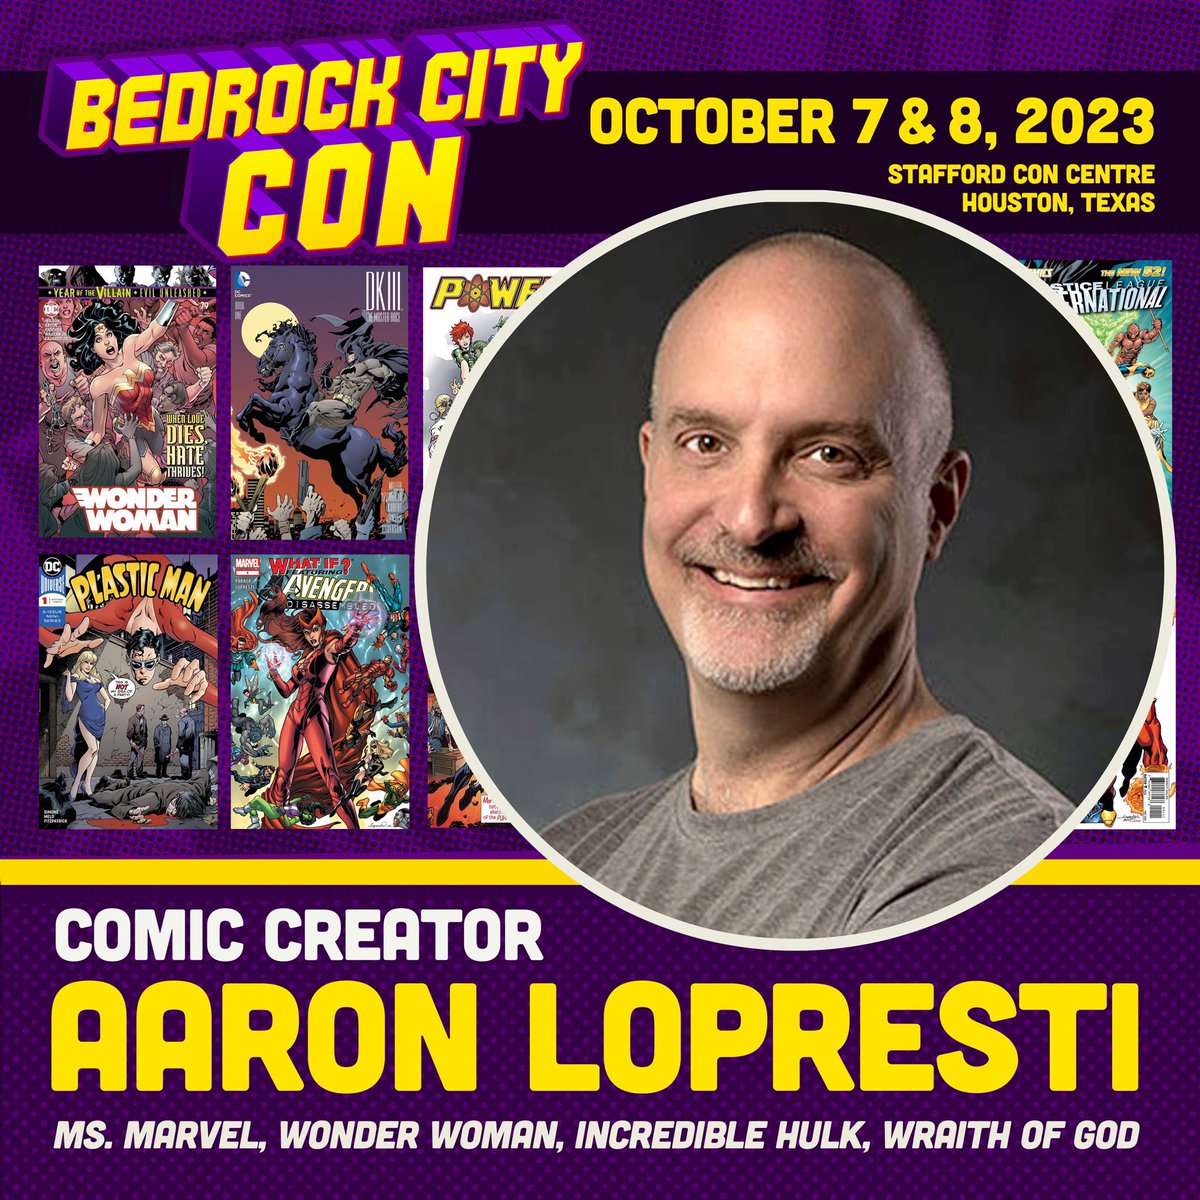 A Murderer’s Row of artists will be at the @BedrockCity convention in Houston (this October), and also myself. With more guests announcements to come! @TerryMooreArt @aaronlopresti @KevinNowlan @jeffsmithsbone